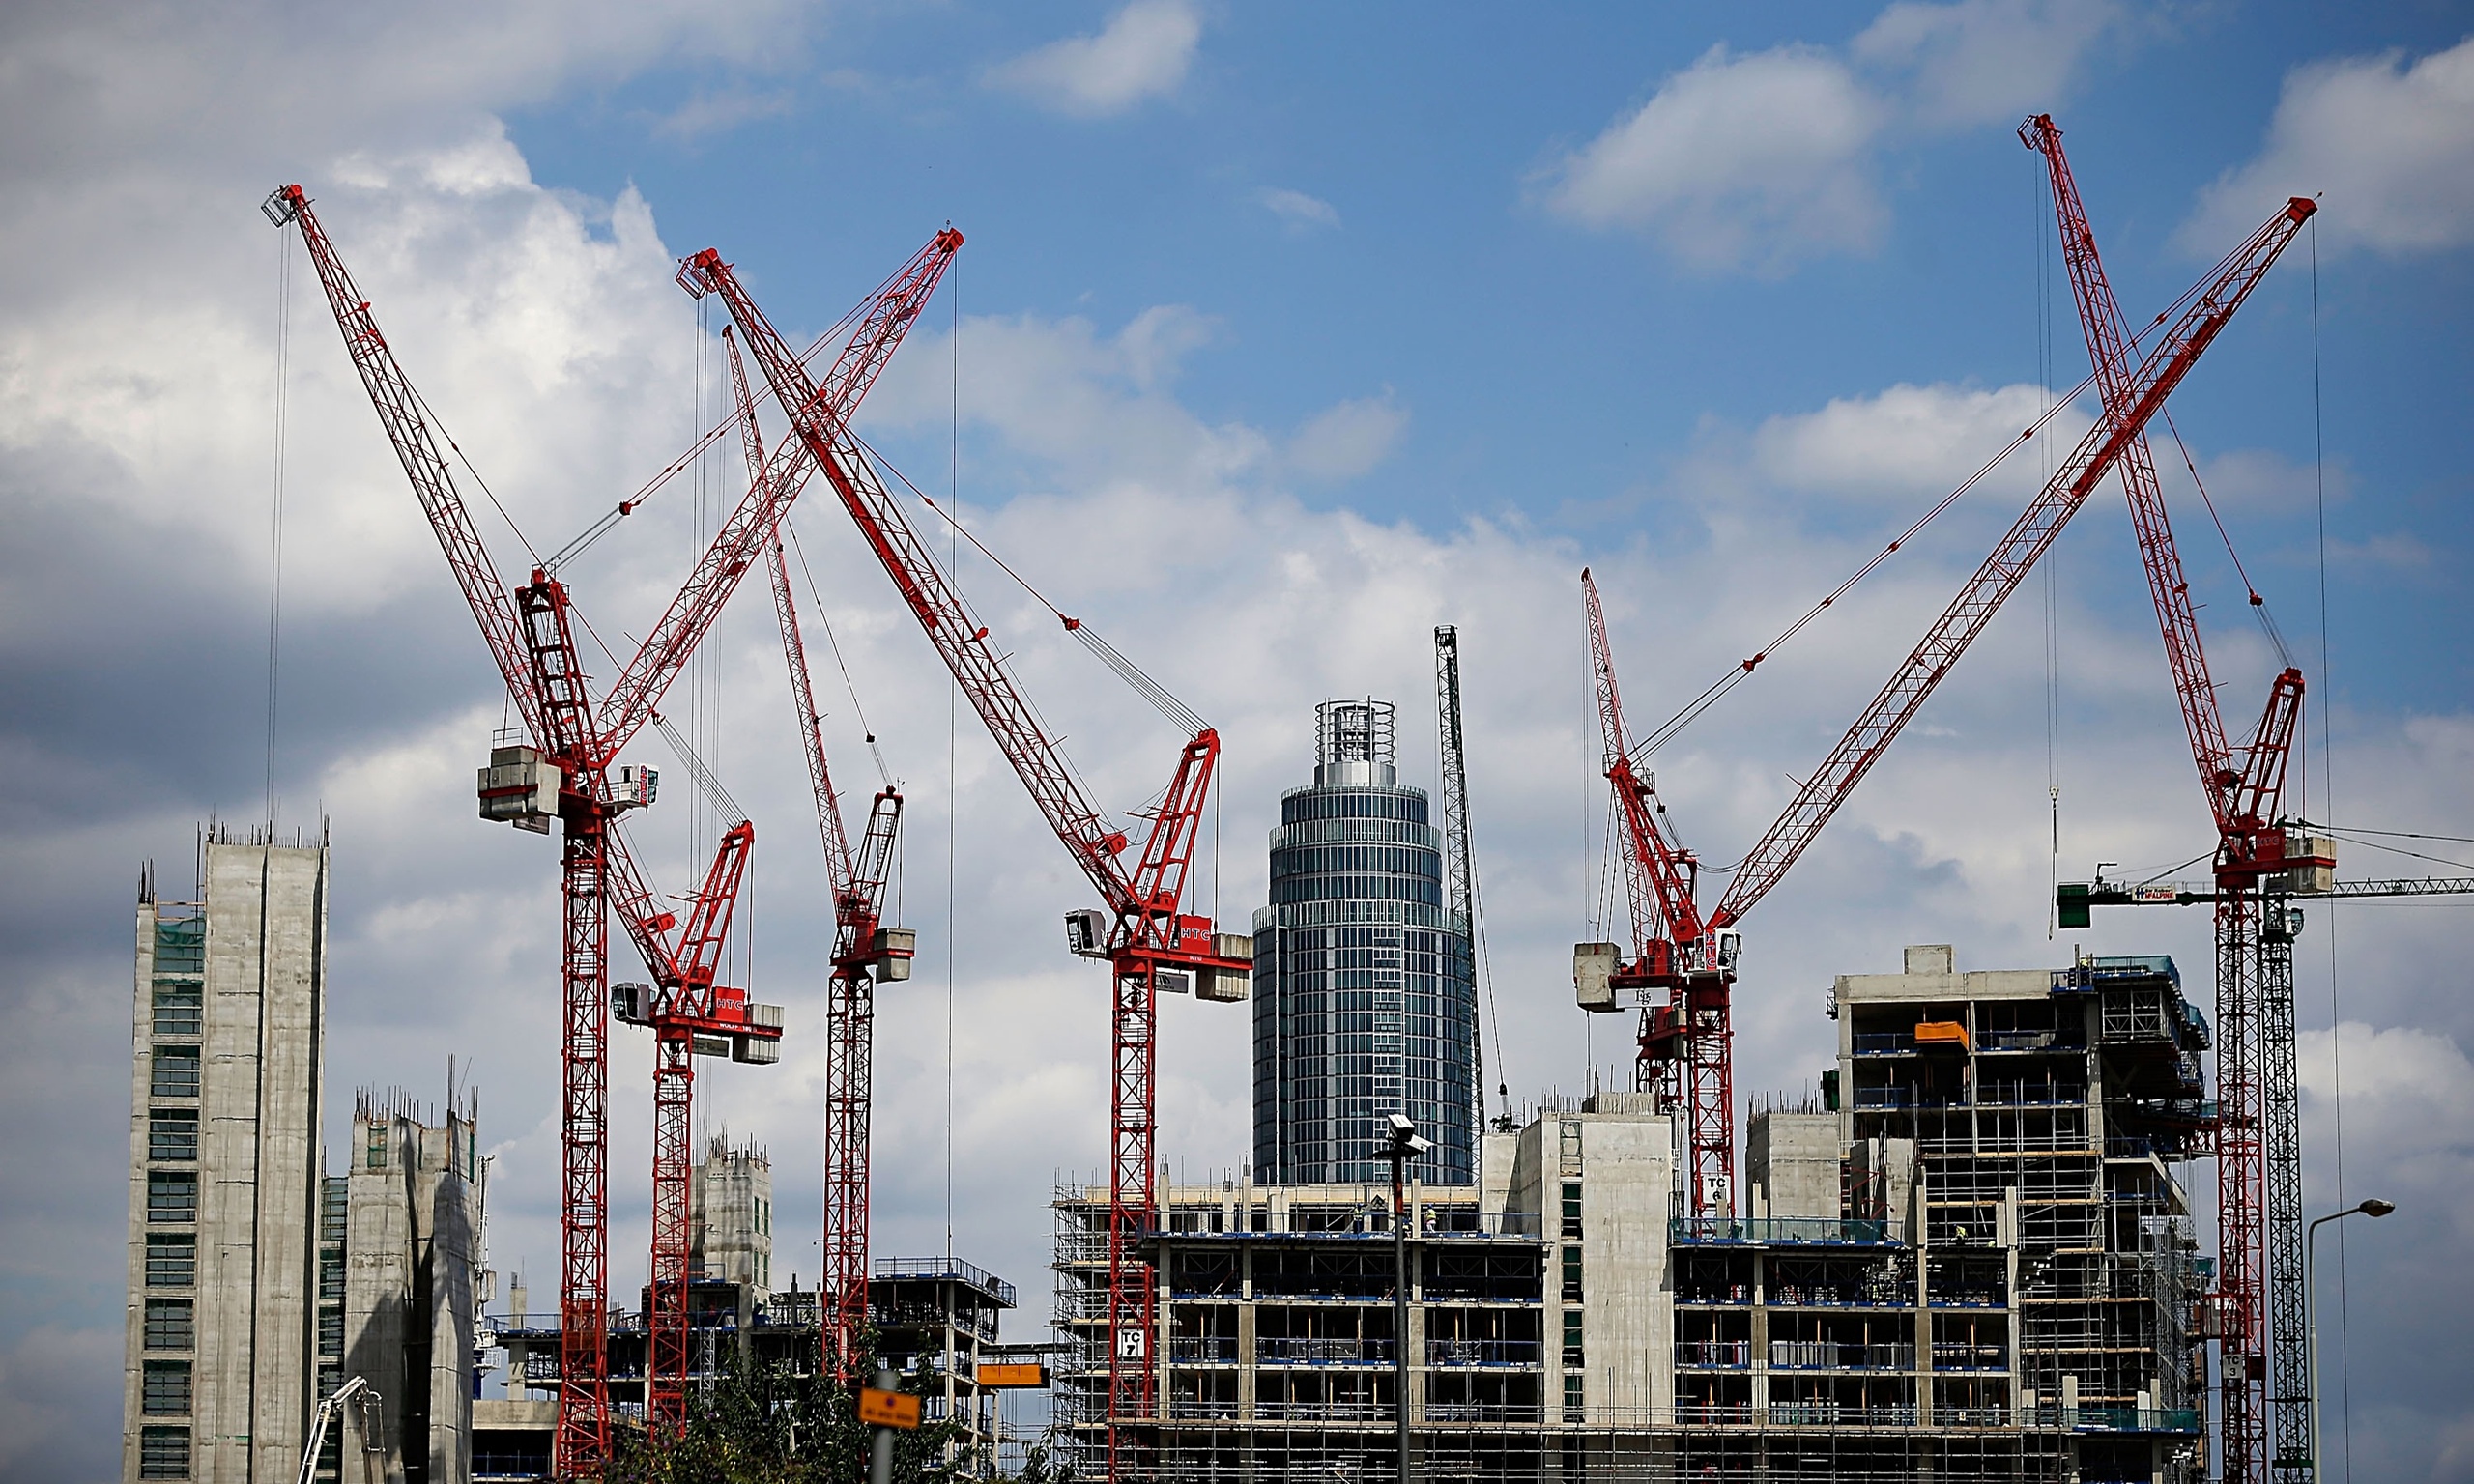 Construction sector optimism fades as housing market cools | Business | The Guardian